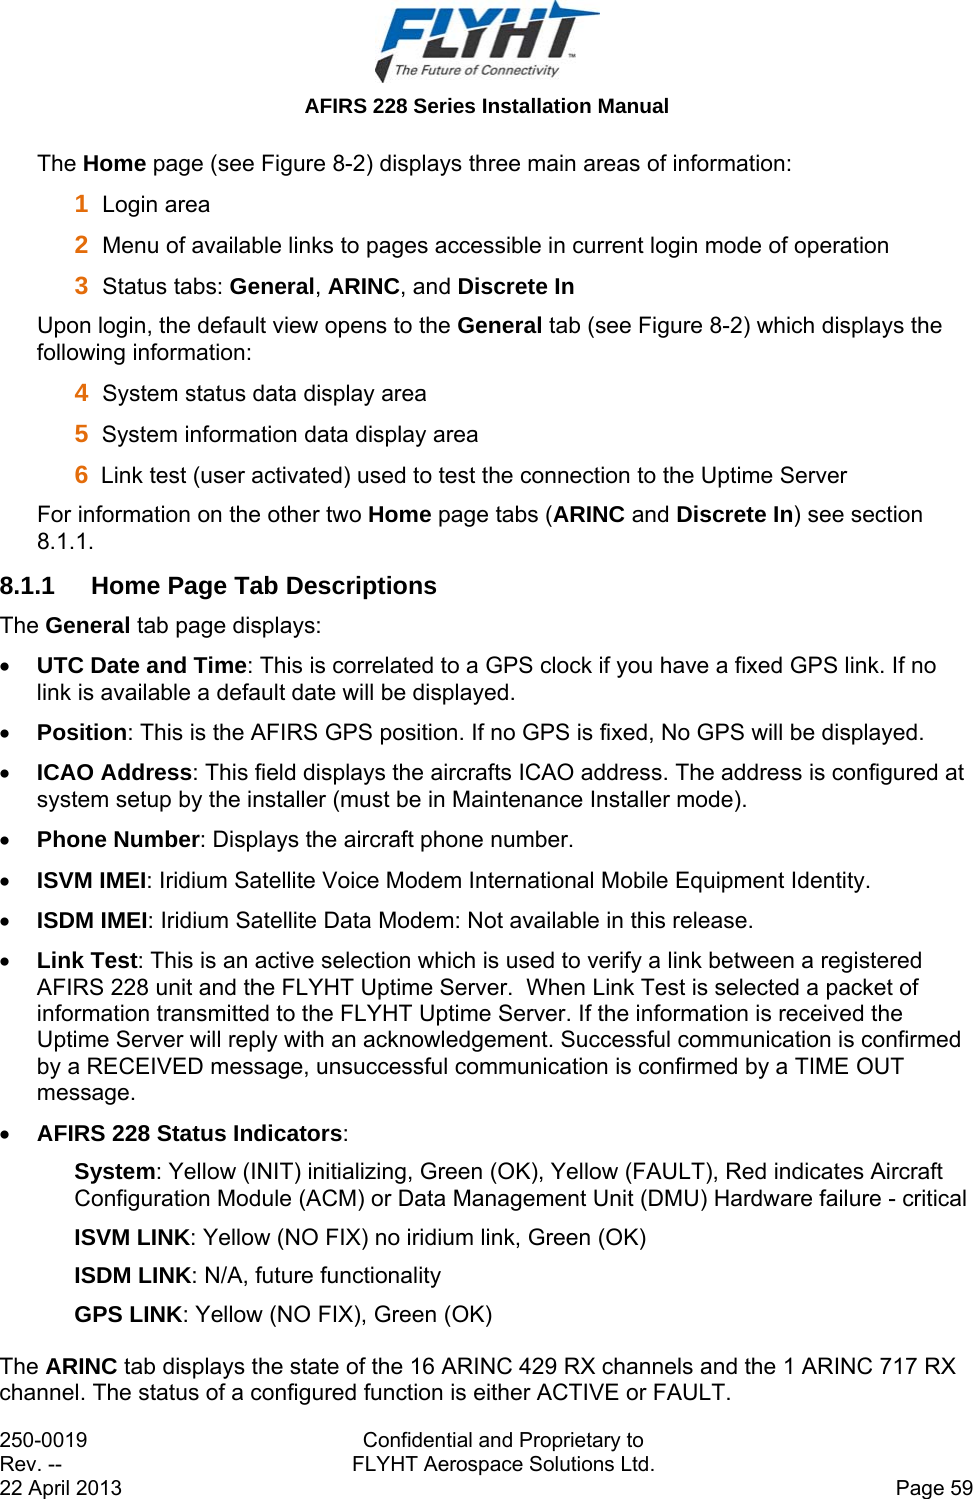  AFIRS 228 Series Installation Manual 250-0019  Confidential and Proprietary to Rev. --  FLYHT Aerospace Solutions Ltd. 22 April 2013    Page 59 The Home page (see Figure 8-2) displays three main areas of information:  1  Login area 2  Menu of available links to pages accessible in current login mode of operation  3  Status tabs: General, ARINC, and Discrete In Upon login, the default view opens to the General tab (see Figure 8-2) which displays the following information:  4  System status data display area  5  System information data display area  6  Link test (user activated) used to test the connection to the Uptime Server  For information on the other two Home page tabs (ARINC and Discrete In) see section 8.1.1. 8.1.1  Home Page Tab Descriptions The General tab page displays:  UTC Date and Time: This is correlated to a GPS clock if you have a fixed GPS link. If no link is available a default date will be displayed.   Position: This is the AFIRS GPS position. If no GPS is fixed, No GPS will be displayed.  ICAO Address: This field displays the aircrafts ICAO address. The address is configured at system setup by the installer (must be in Maintenance Installer mode).  Phone Number: Displays the aircraft phone number.   ISVM IMEI: Iridium Satellite Voice Modem International Mobile Equipment Identity.  ISDM IMEI: Iridium Satellite Data Modem: Not available in this release.  Link Test: This is an active selection which is used to verify a link between a registered AFIRS 228 unit and the FLYHT Uptime Server.  When Link Test is selected a packet of information transmitted to the FLYHT Uptime Server. If the information is received the Uptime Server will reply with an acknowledgement. Successful communication is confirmed by a RECEIVED message, unsuccessful communication is confirmed by a TIME OUT message.    AFIRS 228 Status Indicators: System: Yellow (INIT) initializing, Green (OK), Yellow (FAULT), Red indicates Aircraft Configuration Module (ACM) or Data Management Unit (DMU) Hardware failure - critical  ISVM LINK: Yellow (NO FIX) no iridium link, Green (OK) ISDM LINK: N/A, future functionality GPS LINK: Yellow (NO FIX), Green (OK) The ARINC tab displays the state of the 16 ARINC 429 RX channels and the 1 ARINC 717 RX channel. The status of a configured function is either ACTIVE or FAULT.   